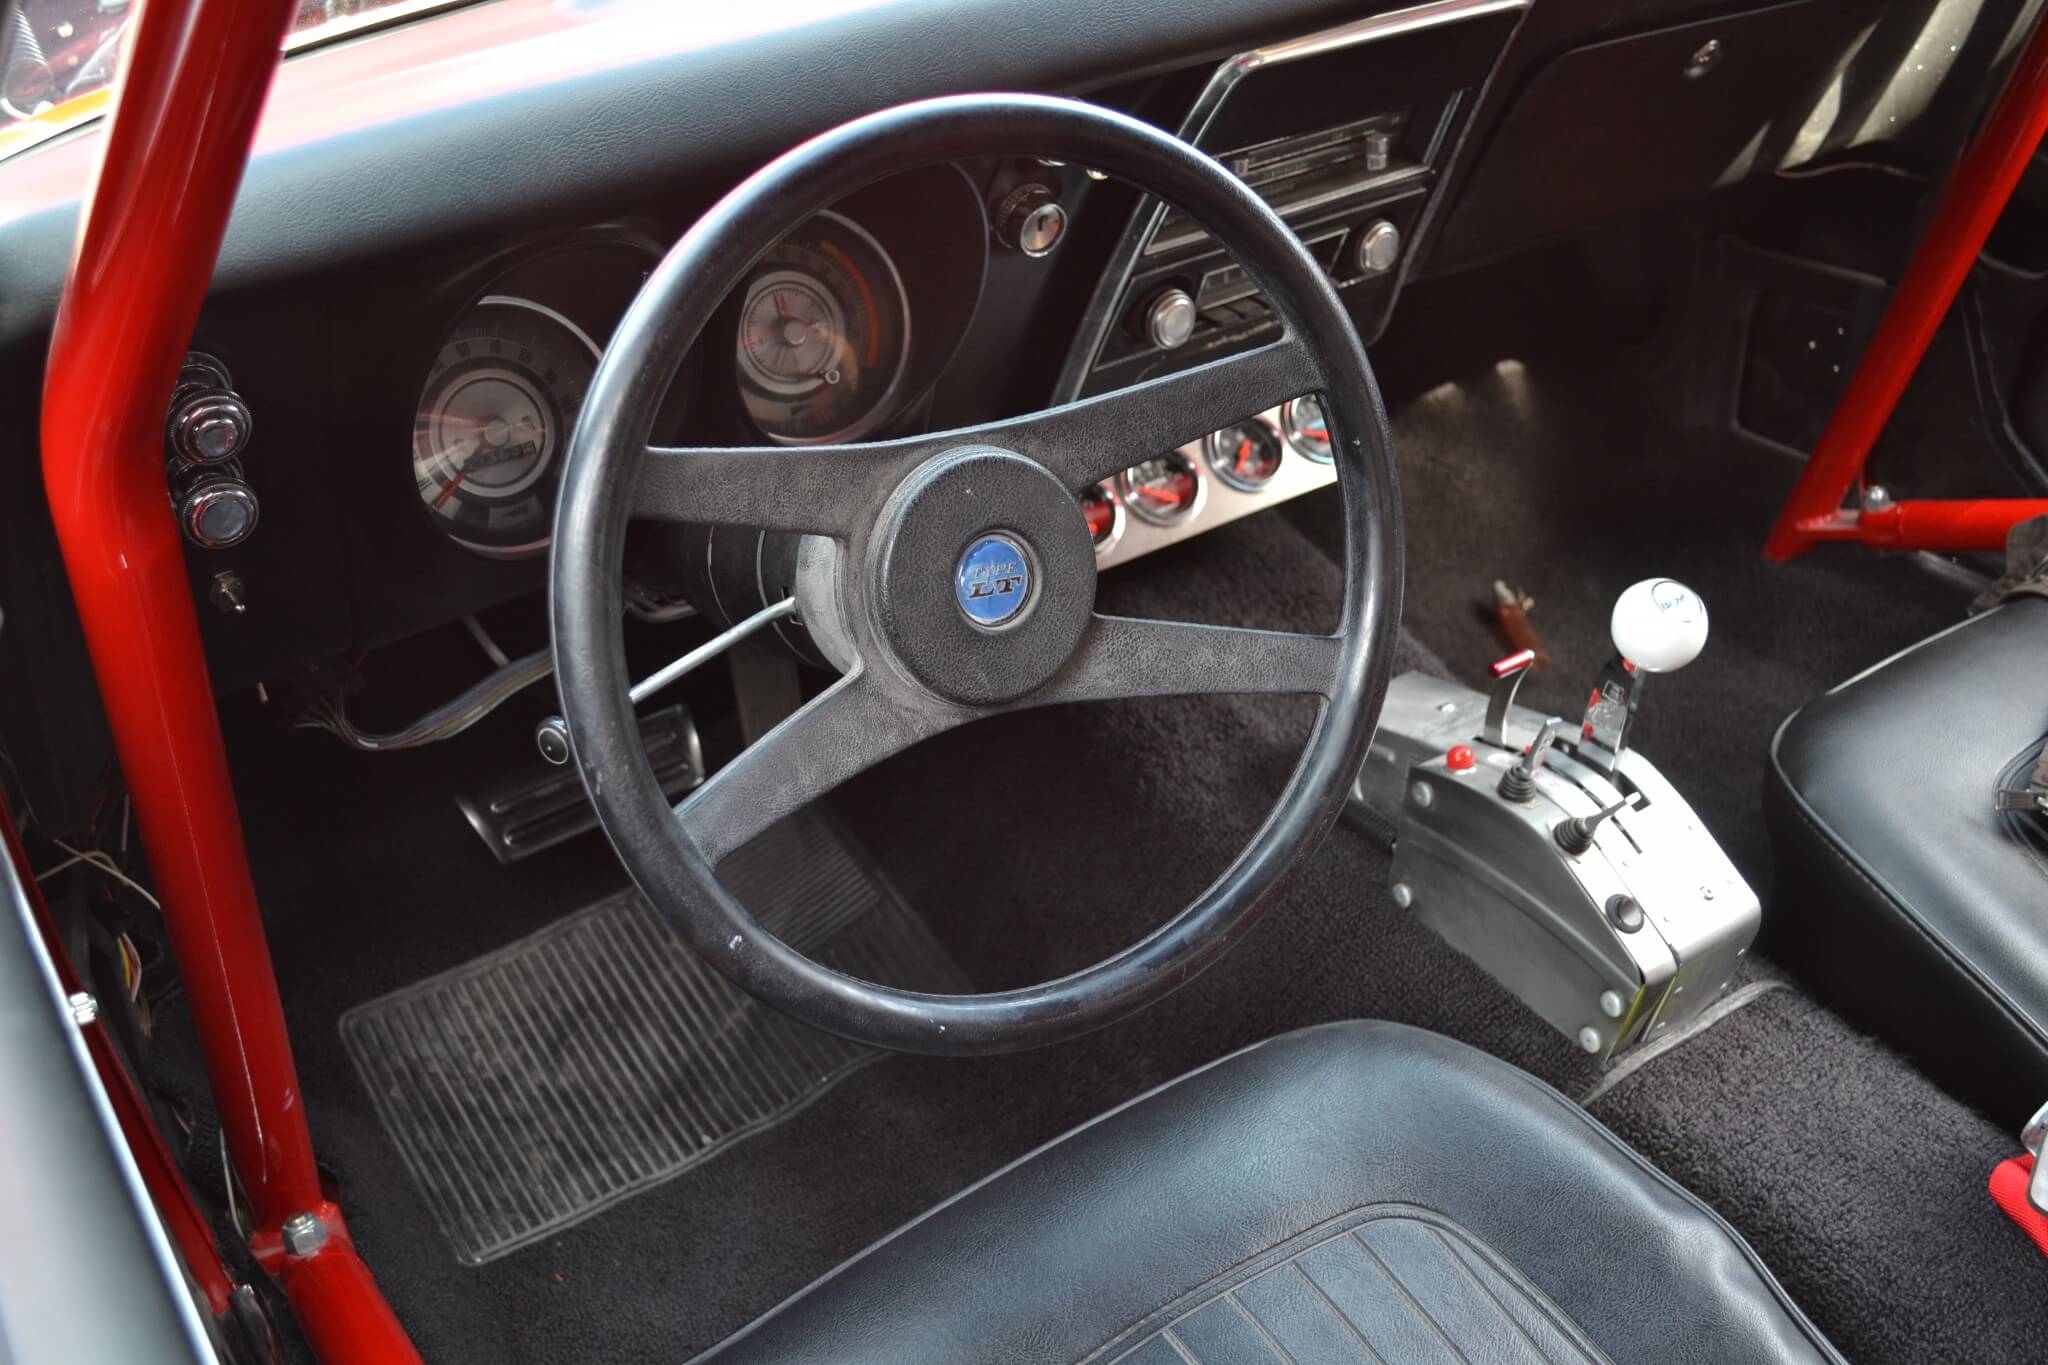 The interior of the car is surprisingly original, and Hamm is even working on getting the factory tachometer to work with the Duramax engine.